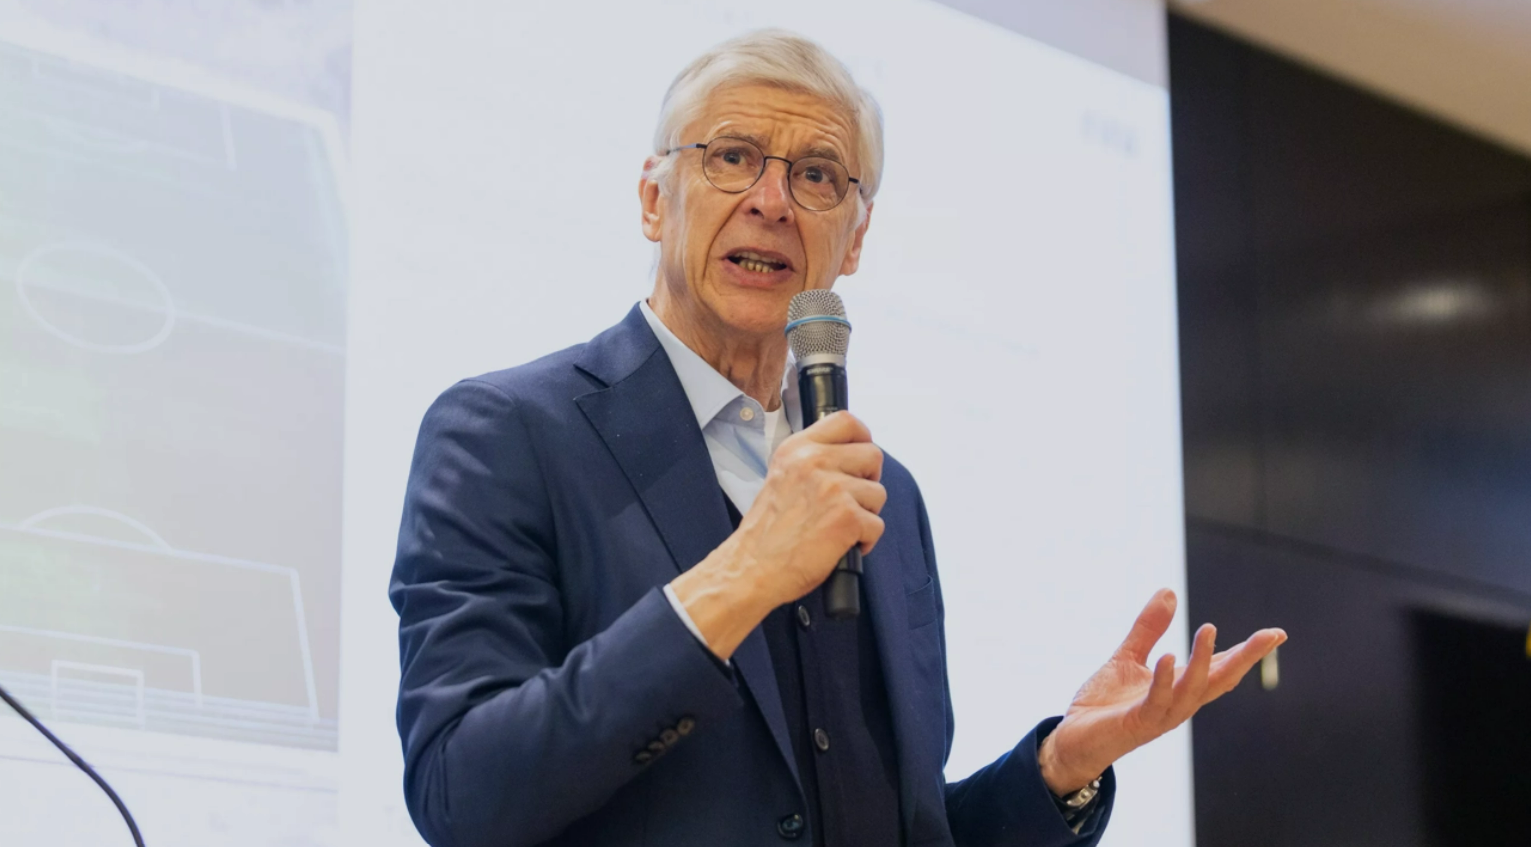 Arsène Wenger, FIFA's chief of global football development, will lead a coaches forum in Doha from May 8 to 9 analysing the Qatar 2022 World Cup finals ©FIFA